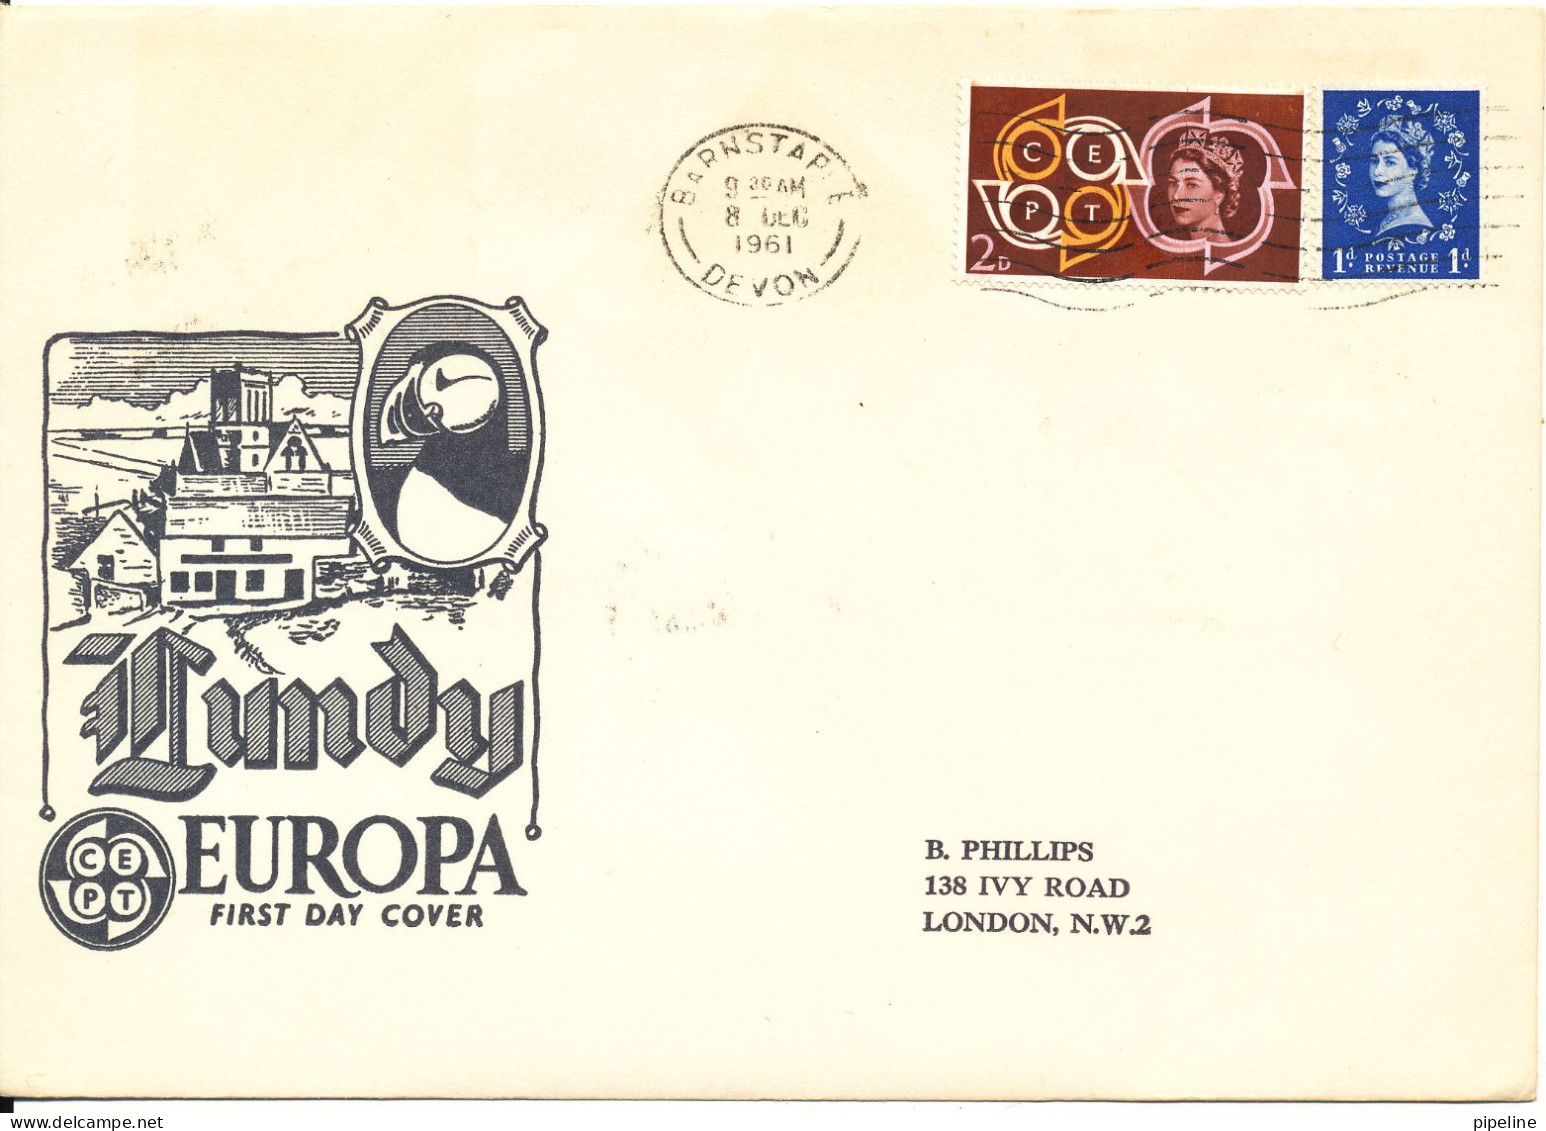 Great Britain And LUNDY FDC  8-12-1961 EUROPA CEPT - 1952-1971 Pre-Decimal Issues